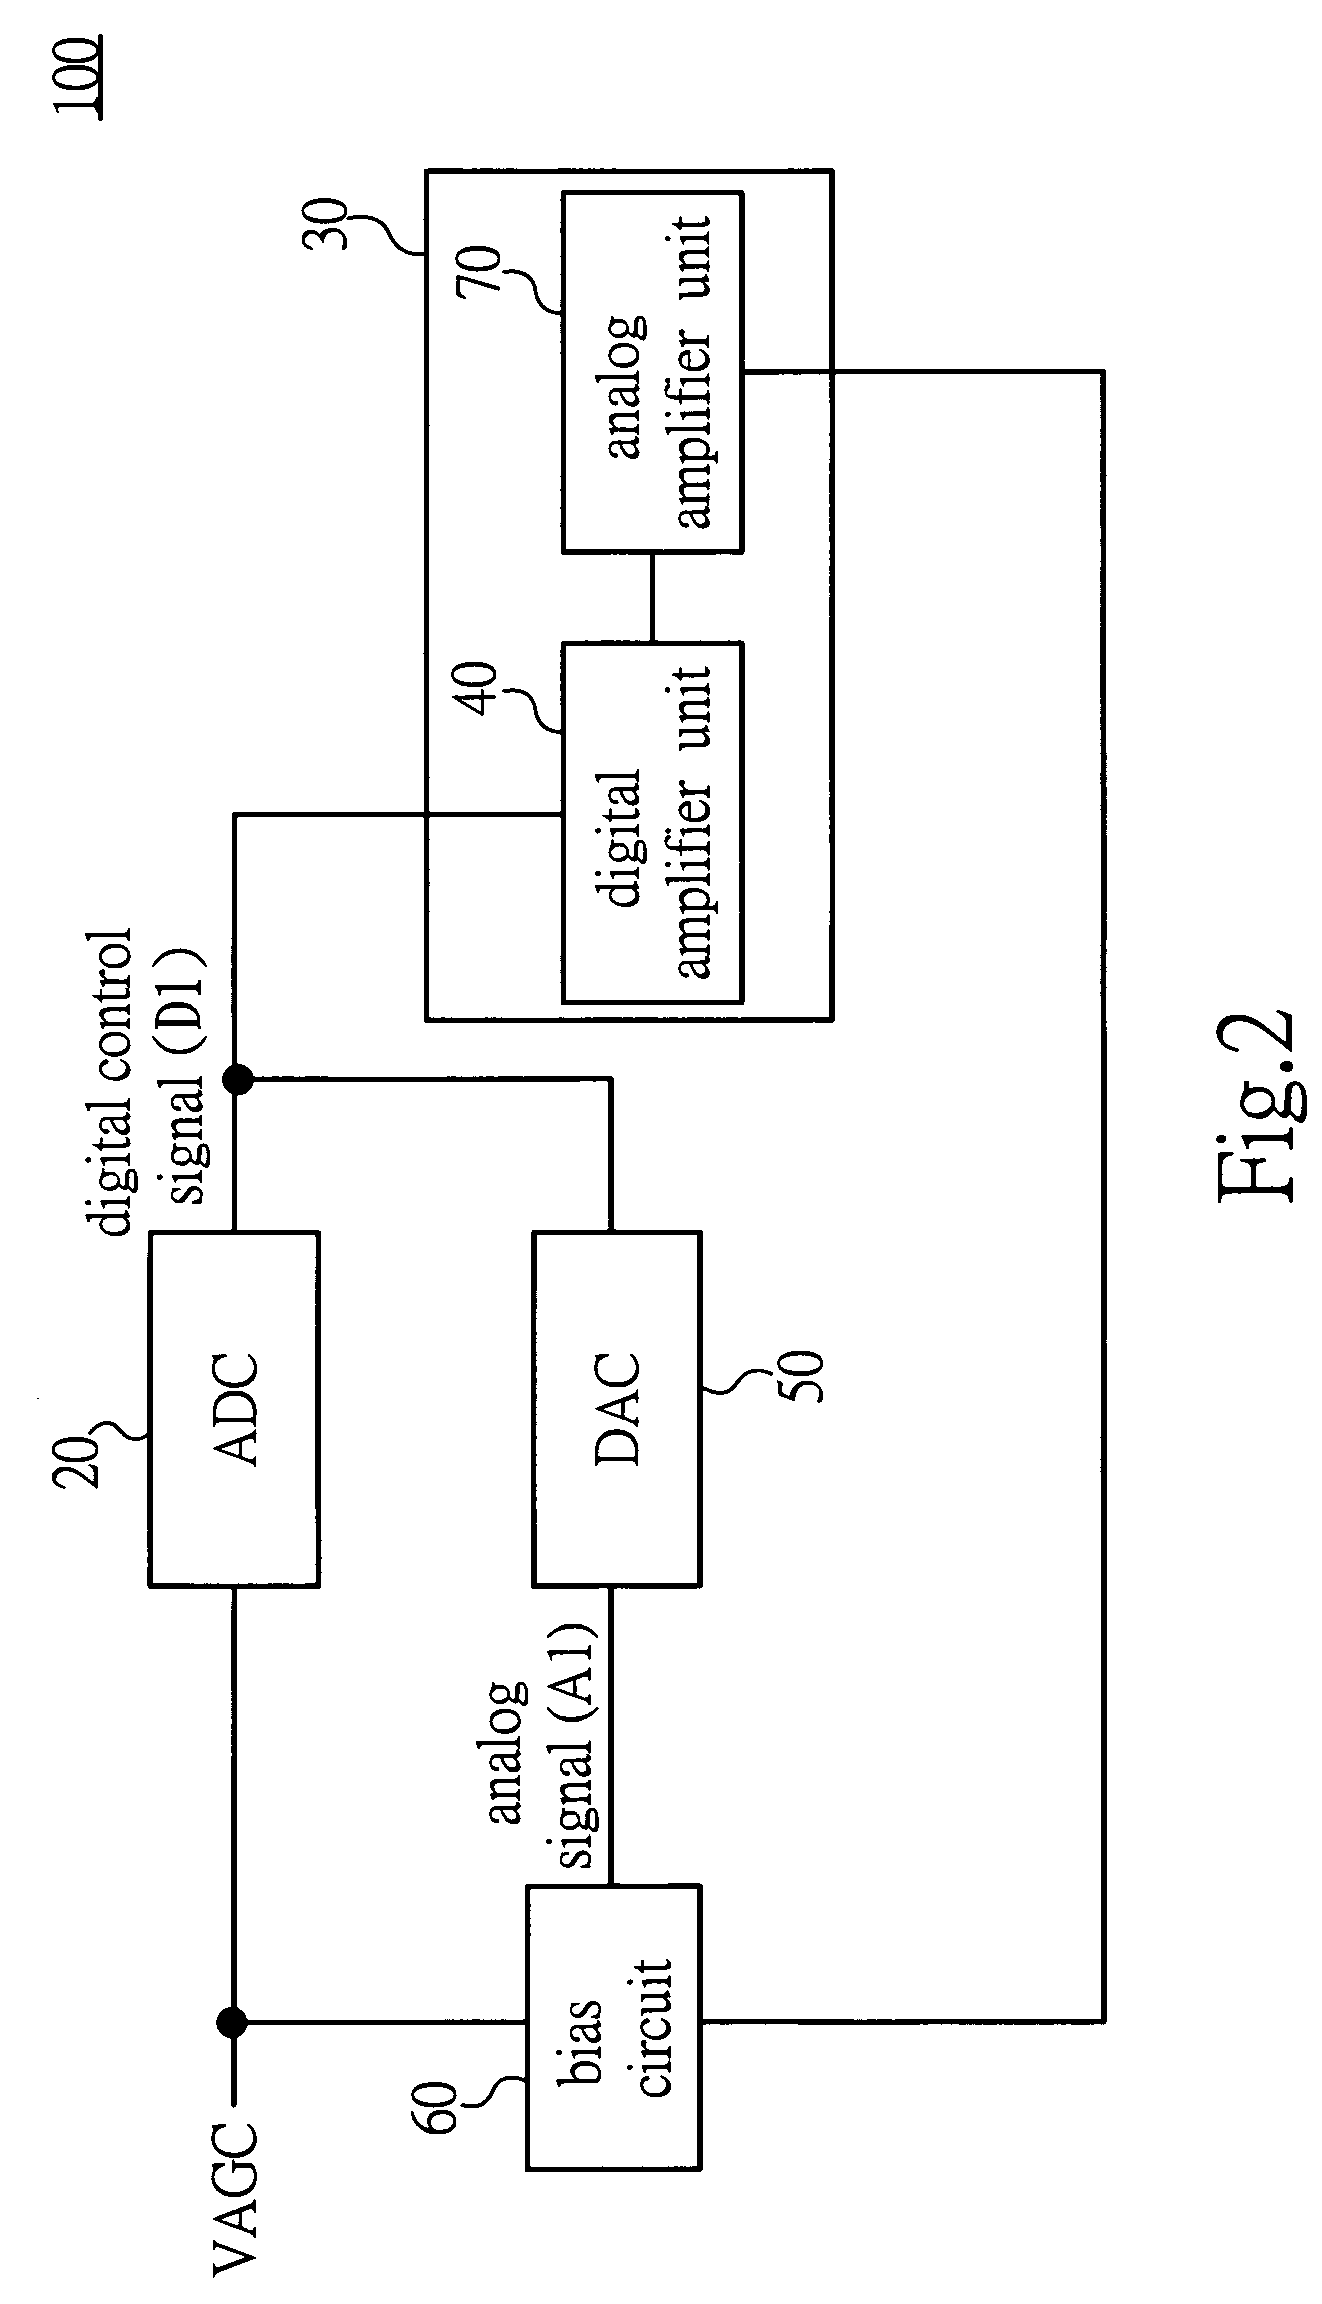 Amplifier gain control circuit for the wireless transceiver